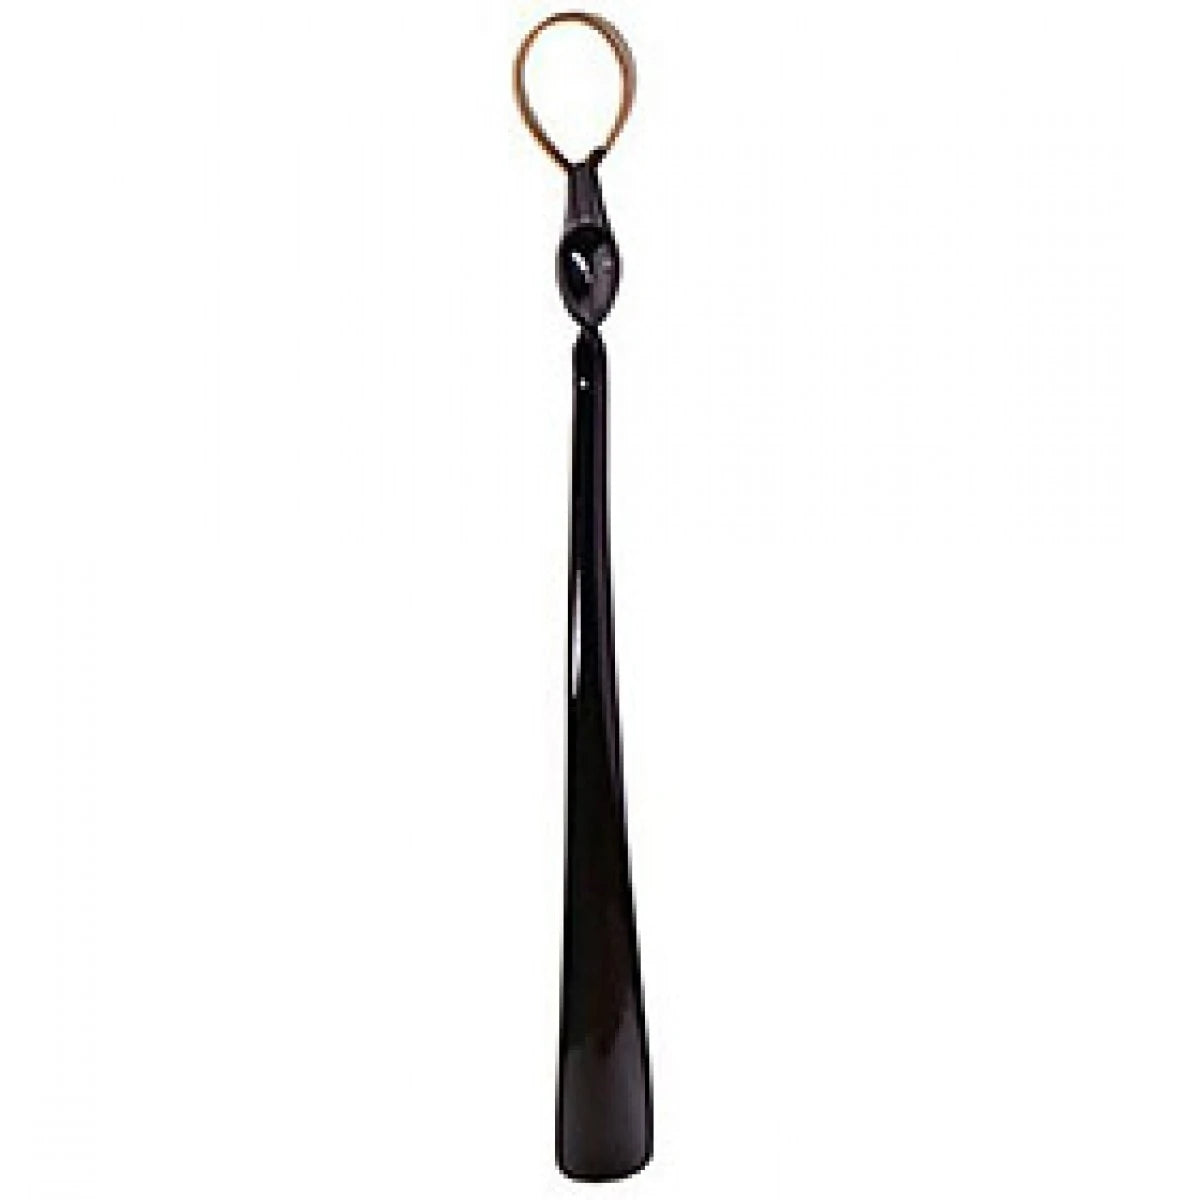 AHC01 B Germano Shoehorn in thermoplastic resin, black.